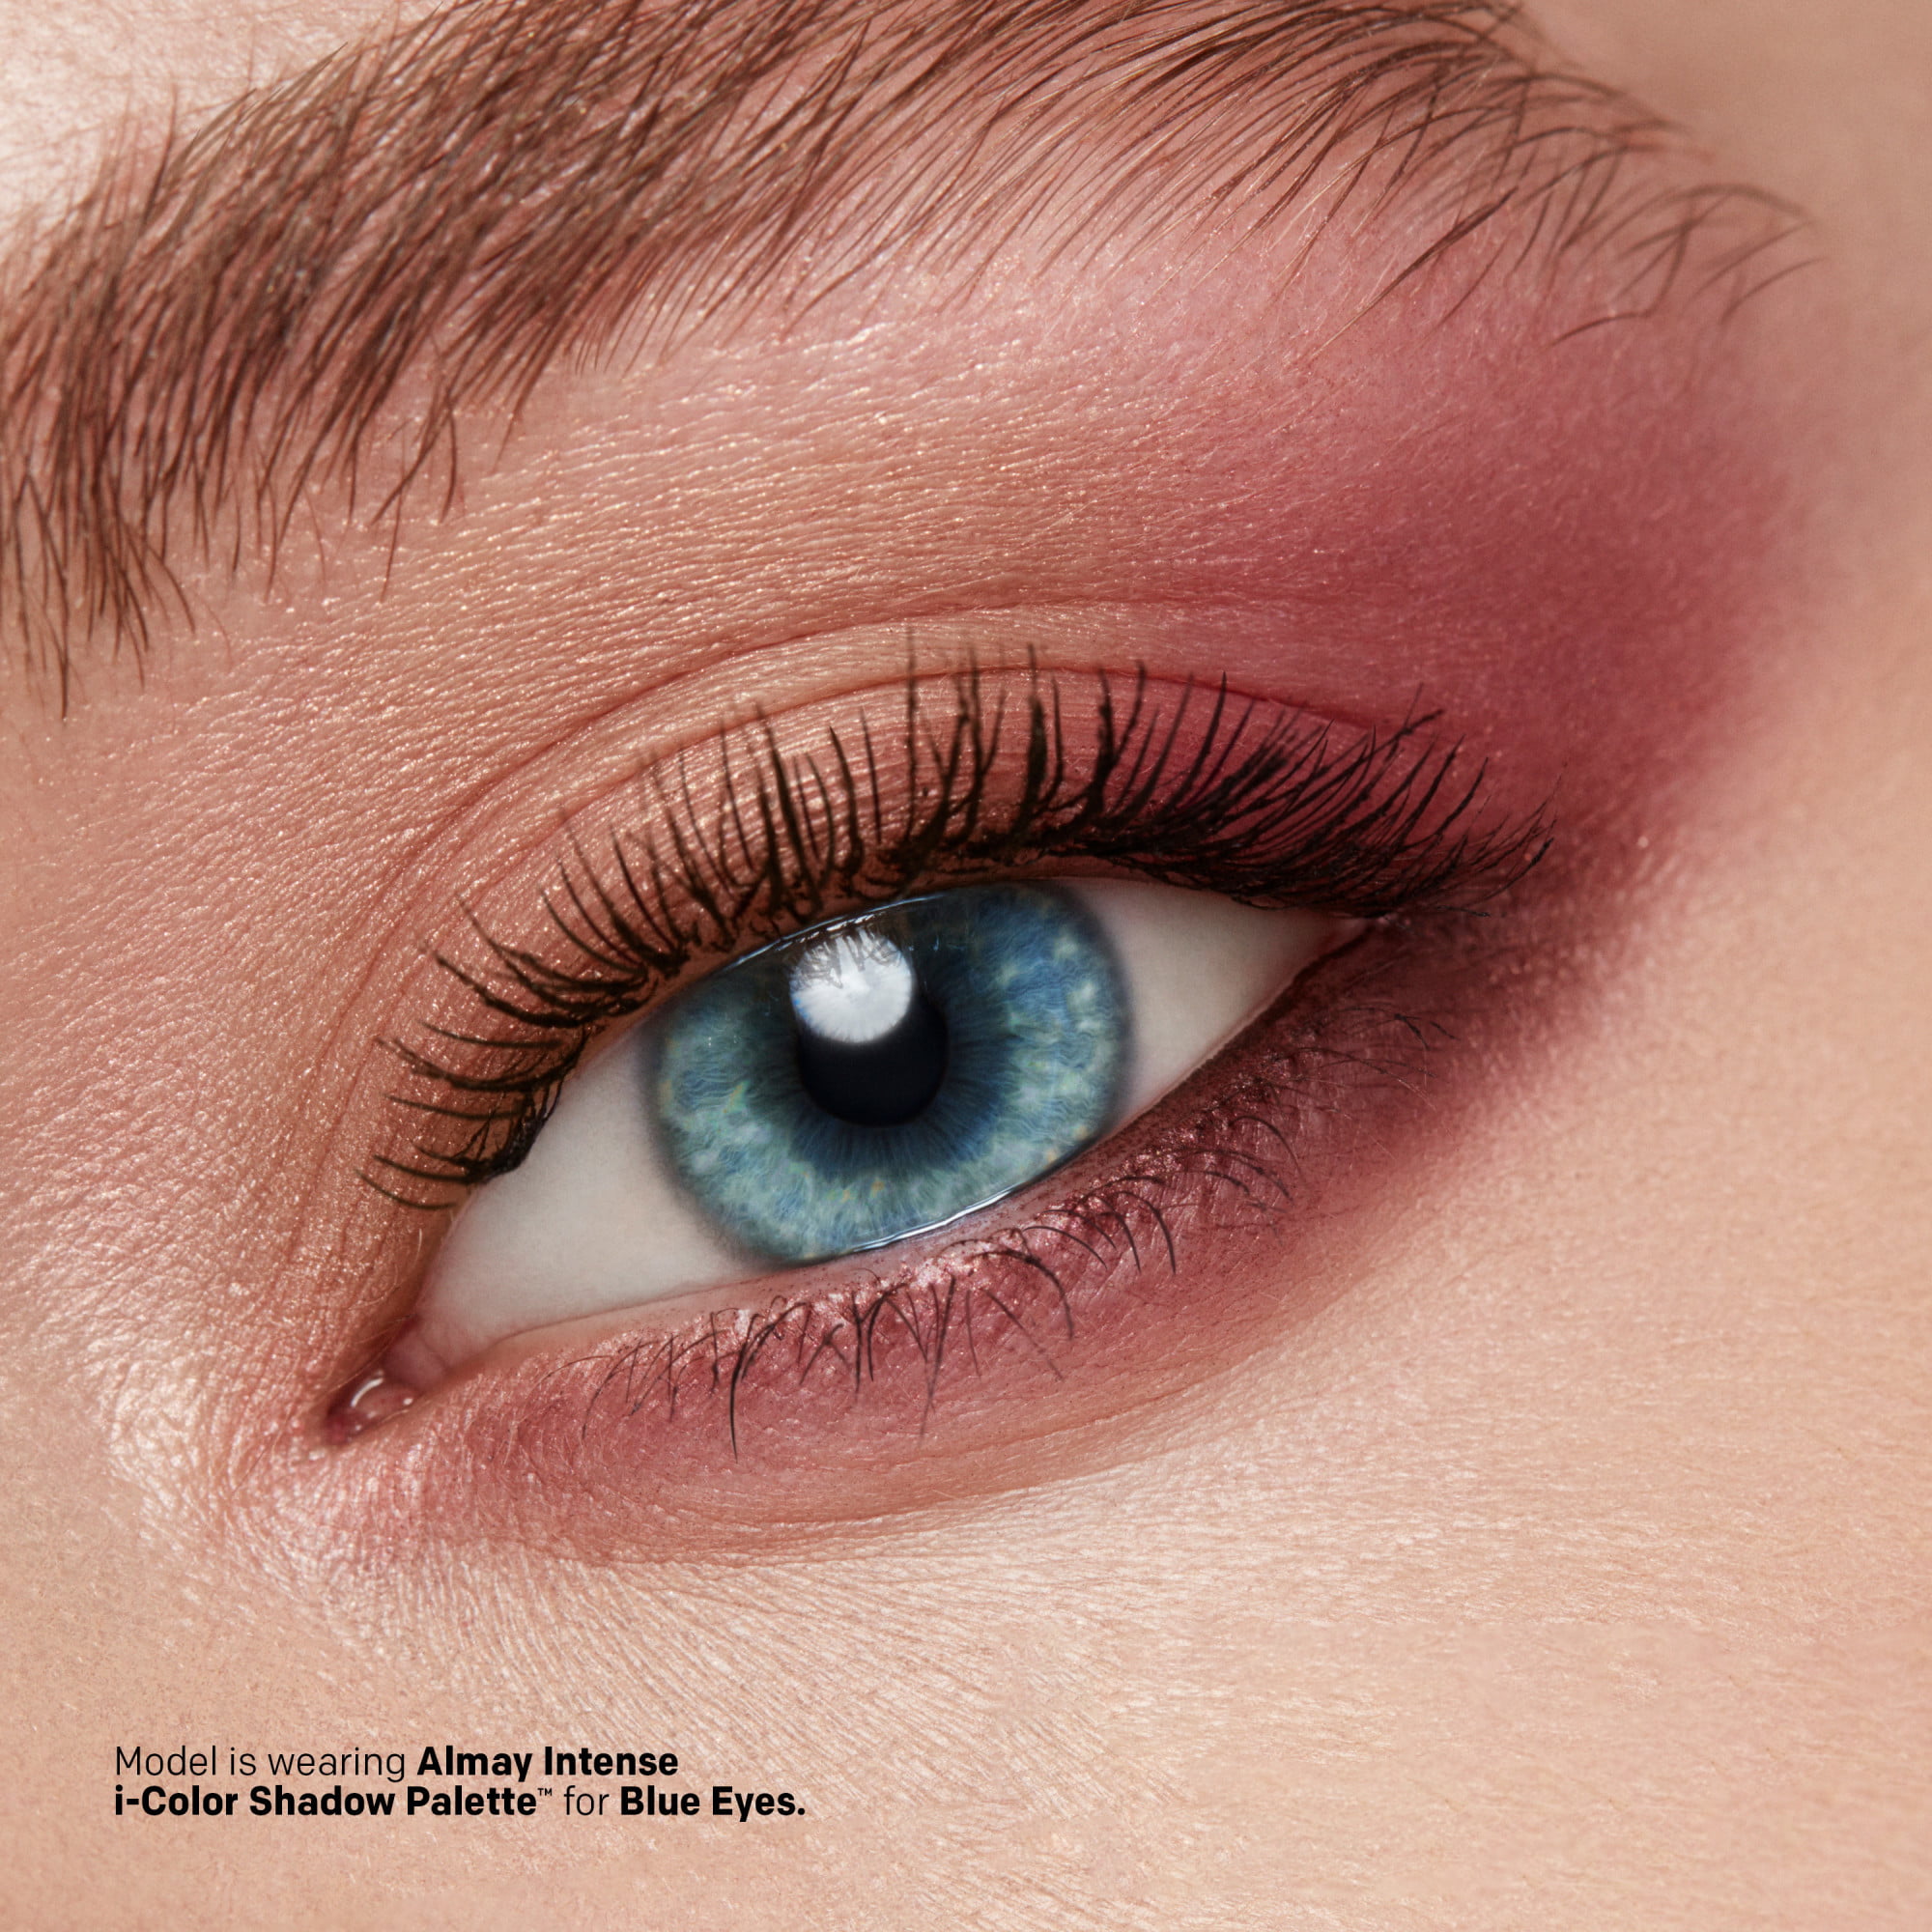 Almany Intense I-Color Shadow Pallette, Hypoallergenic, 020 Blue Eyes - image 5 of 14